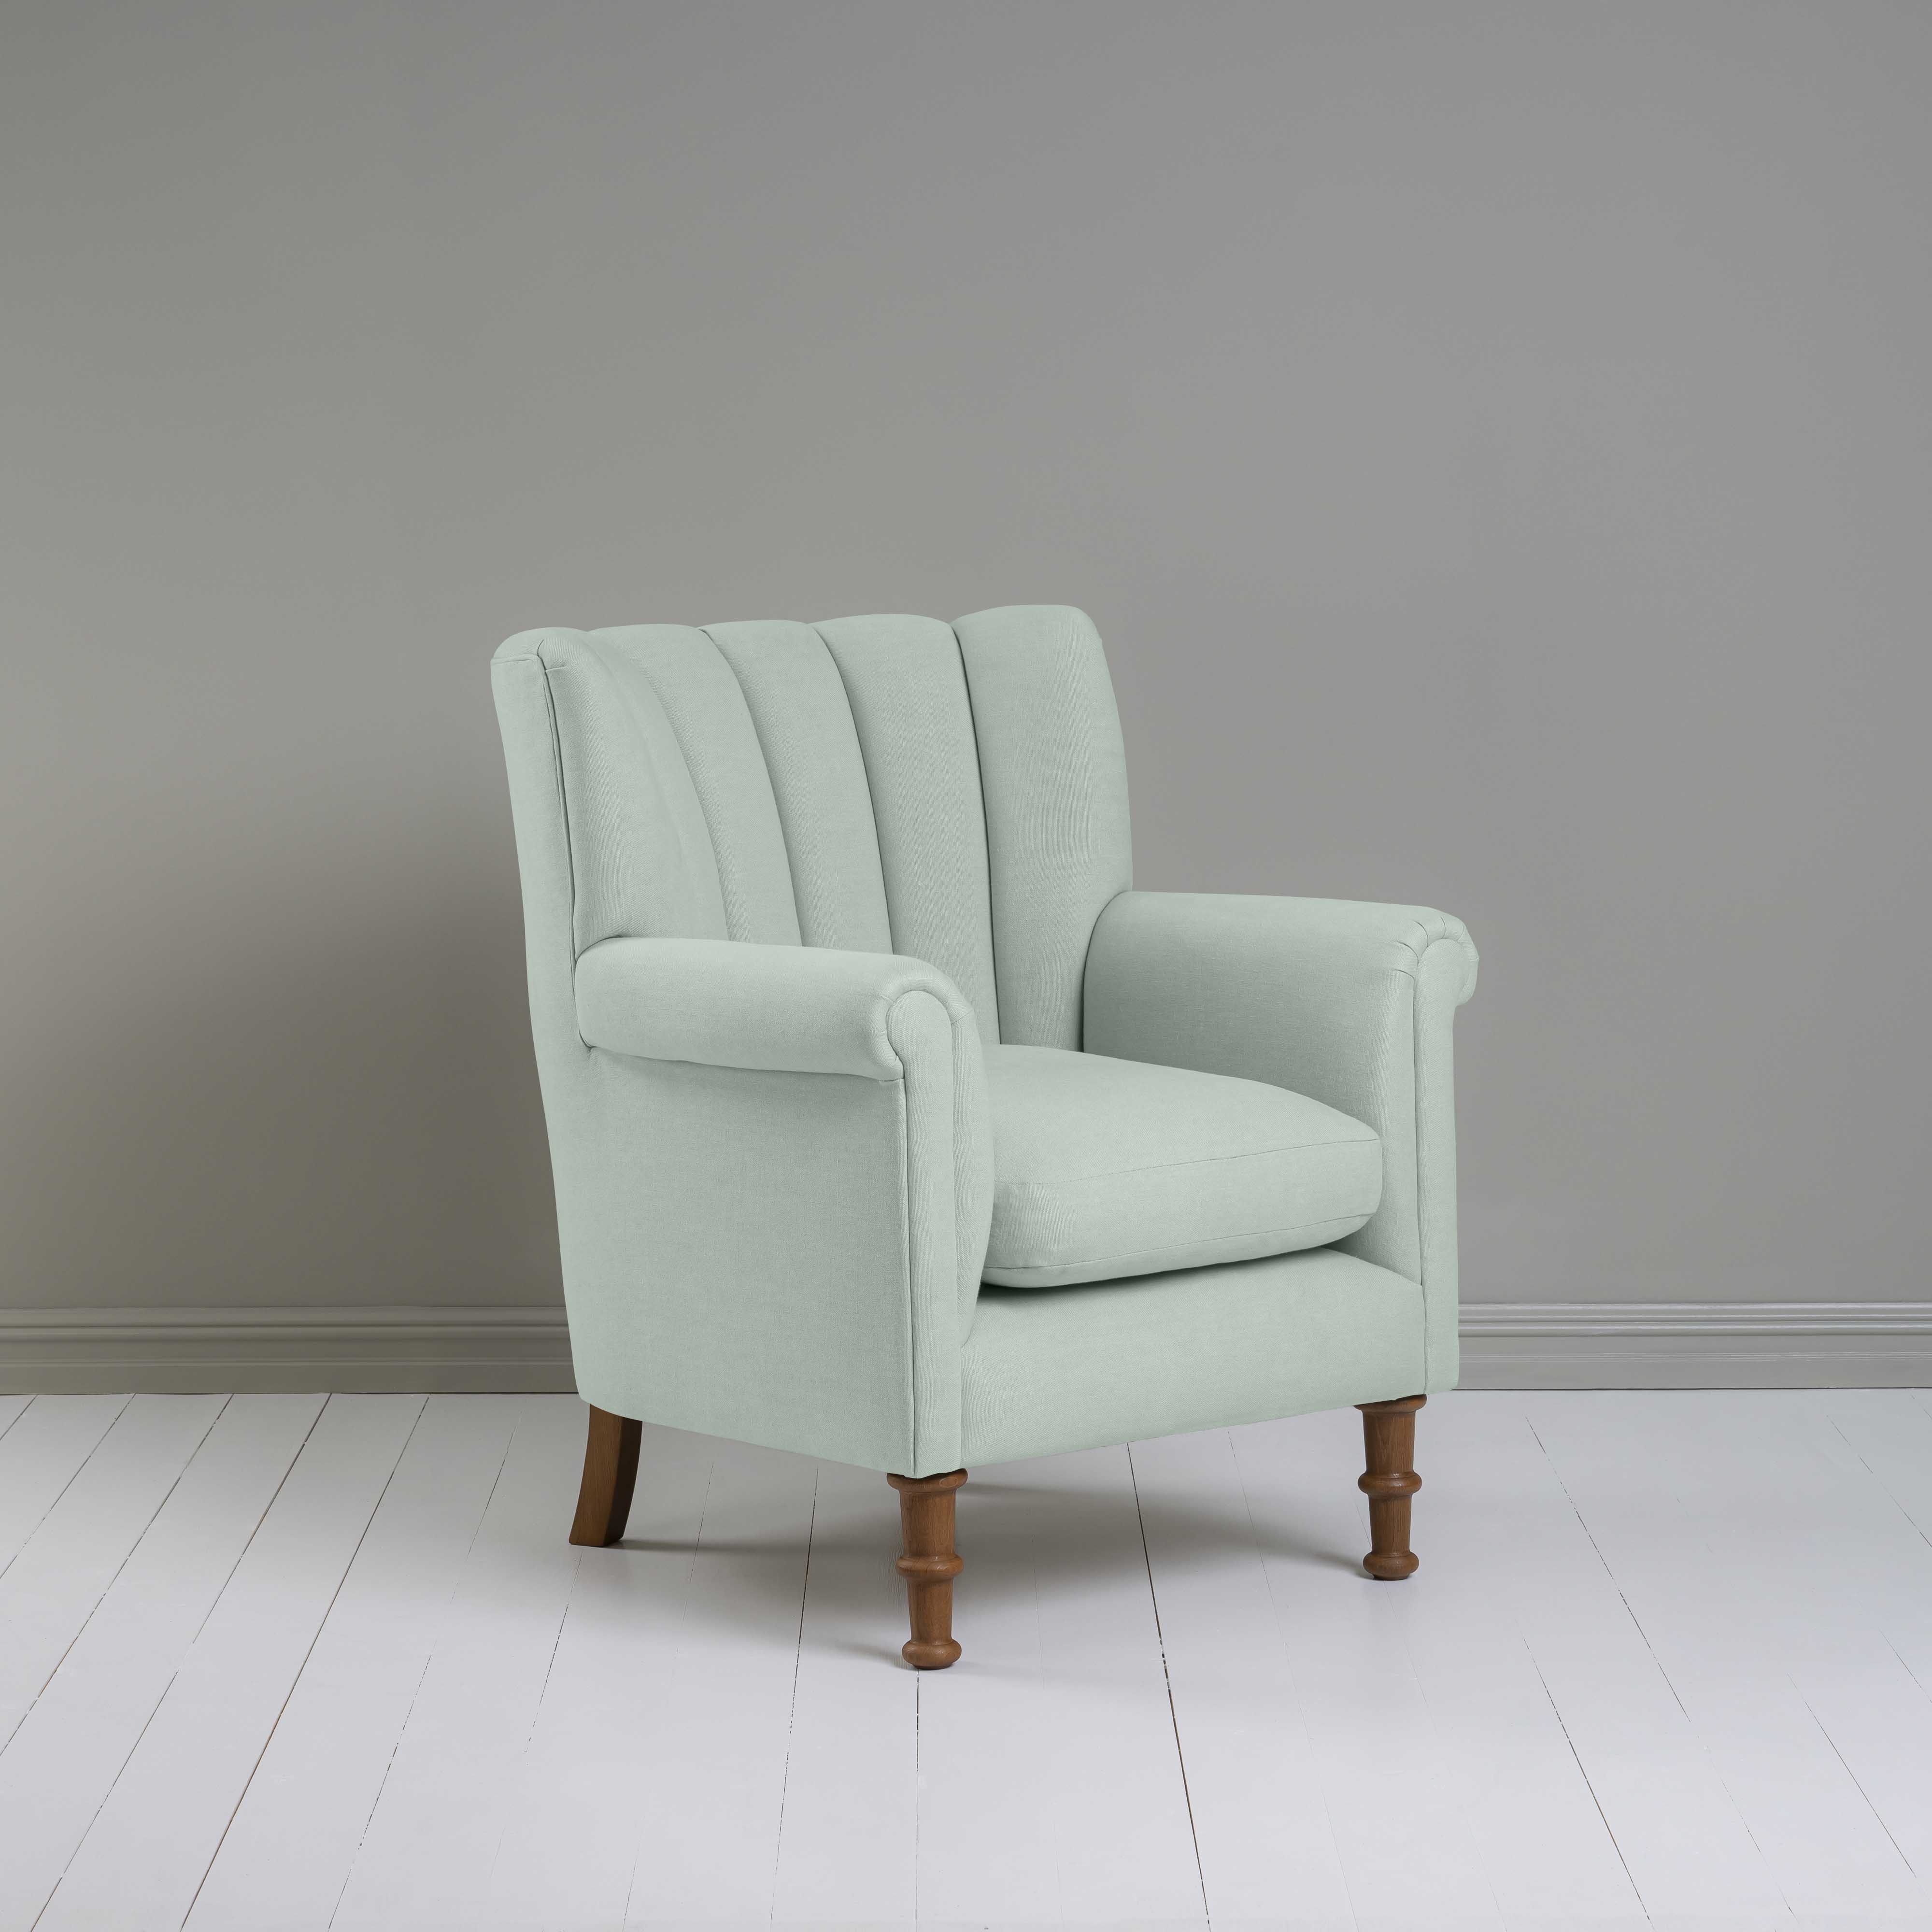  Time Out Armchair in Laidback Linen Sky 